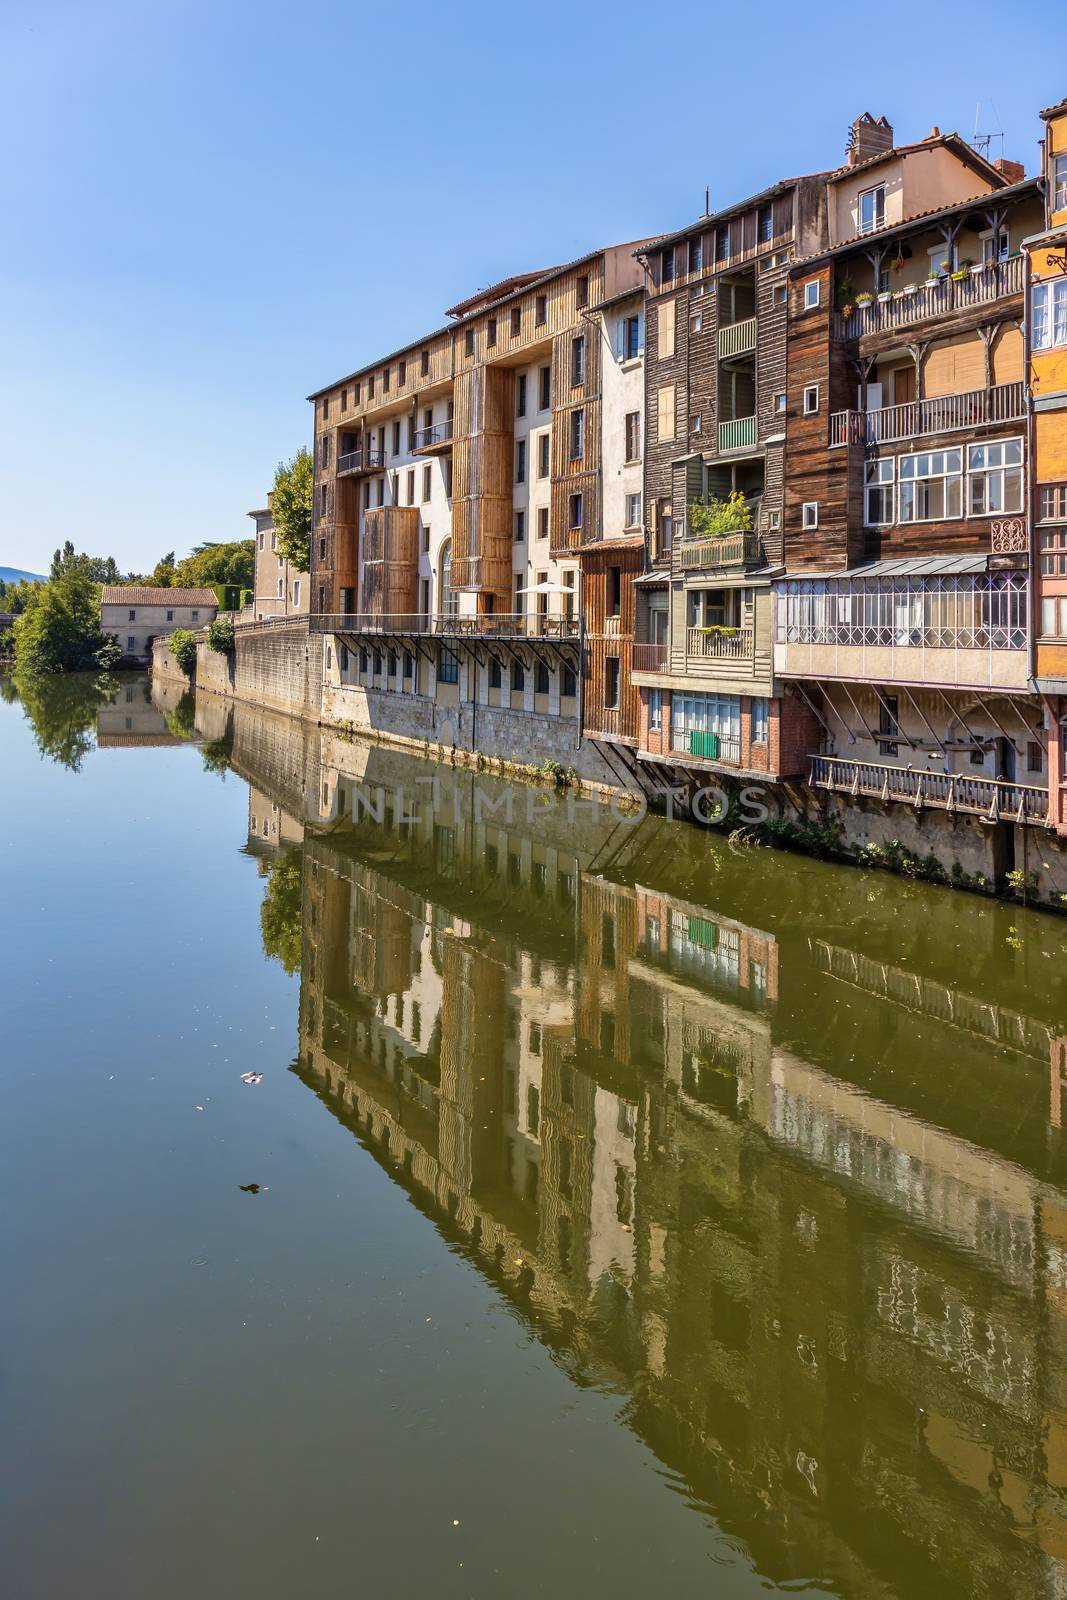 Nice buildings on the river Tarn in French town Castres.